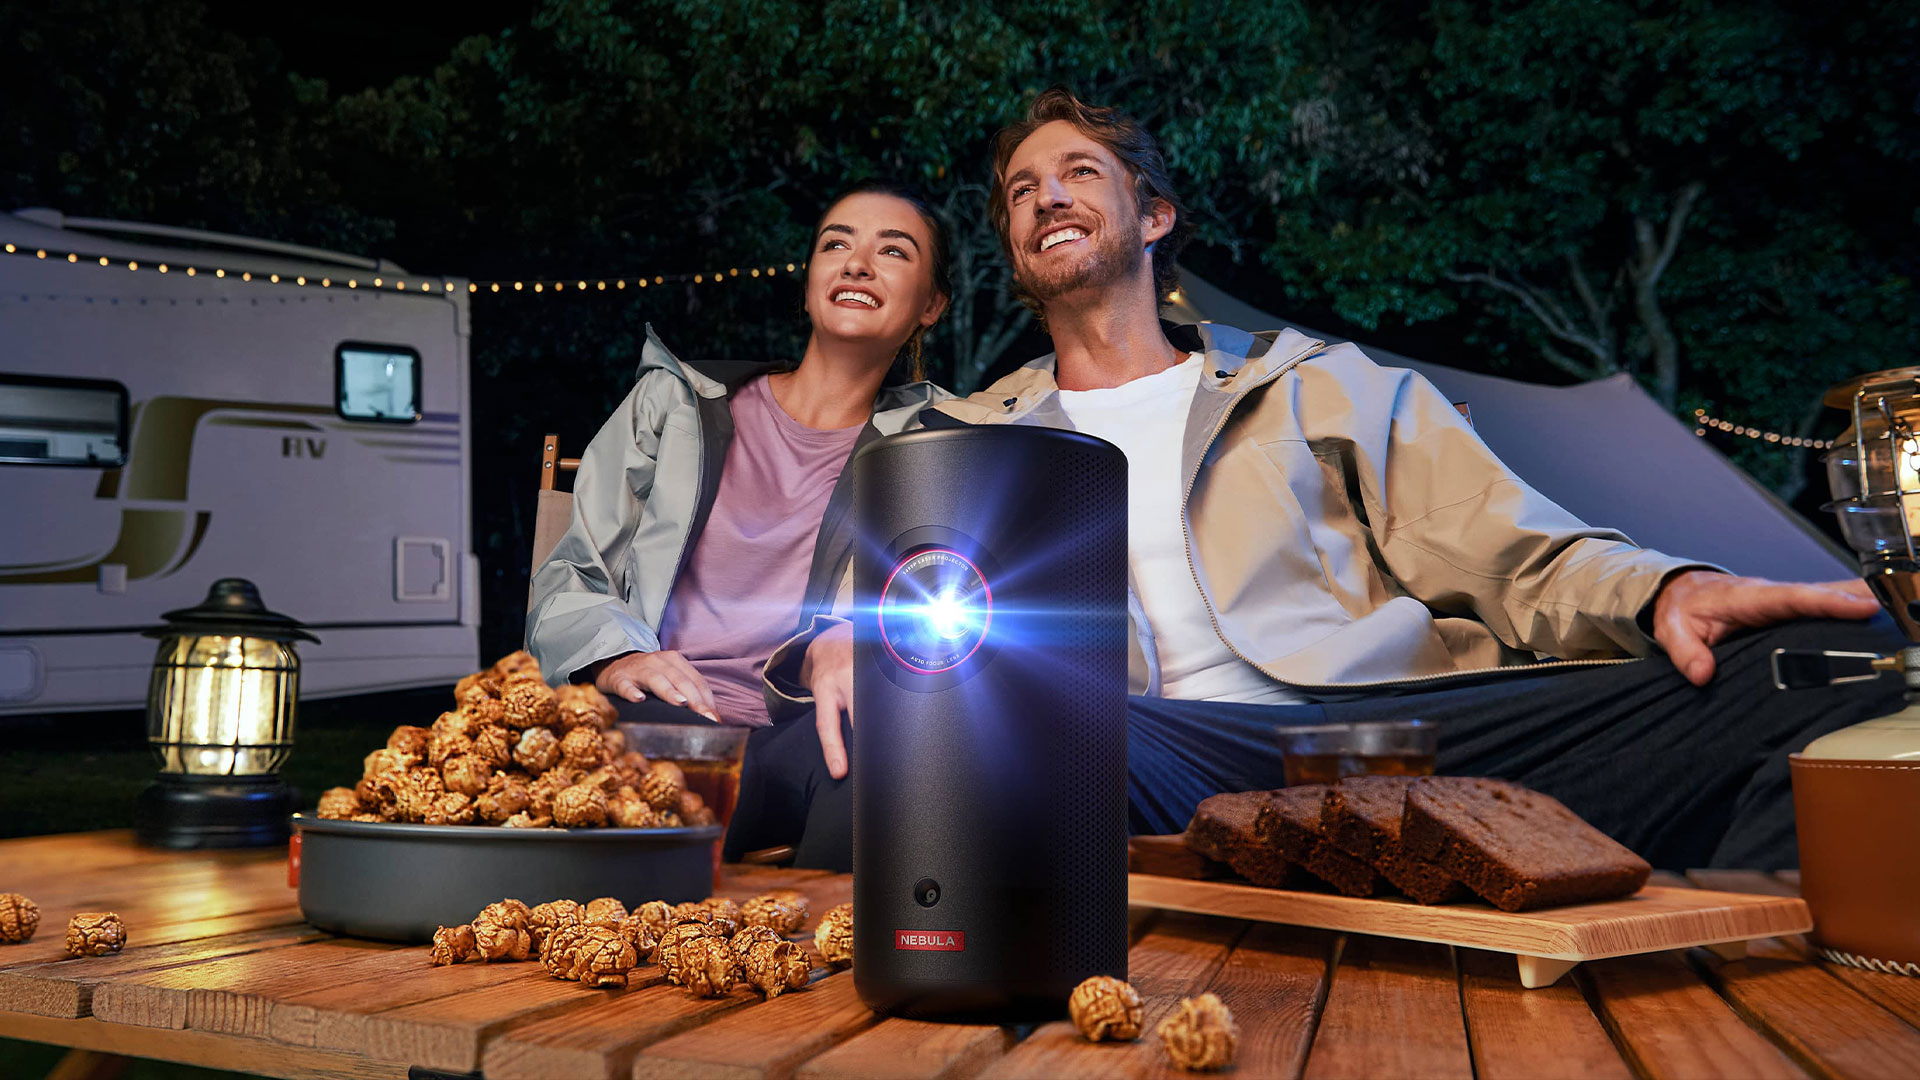 Nebula Capsule 3 Laser Portable Projector Review – Hardware - Projector  Reviews